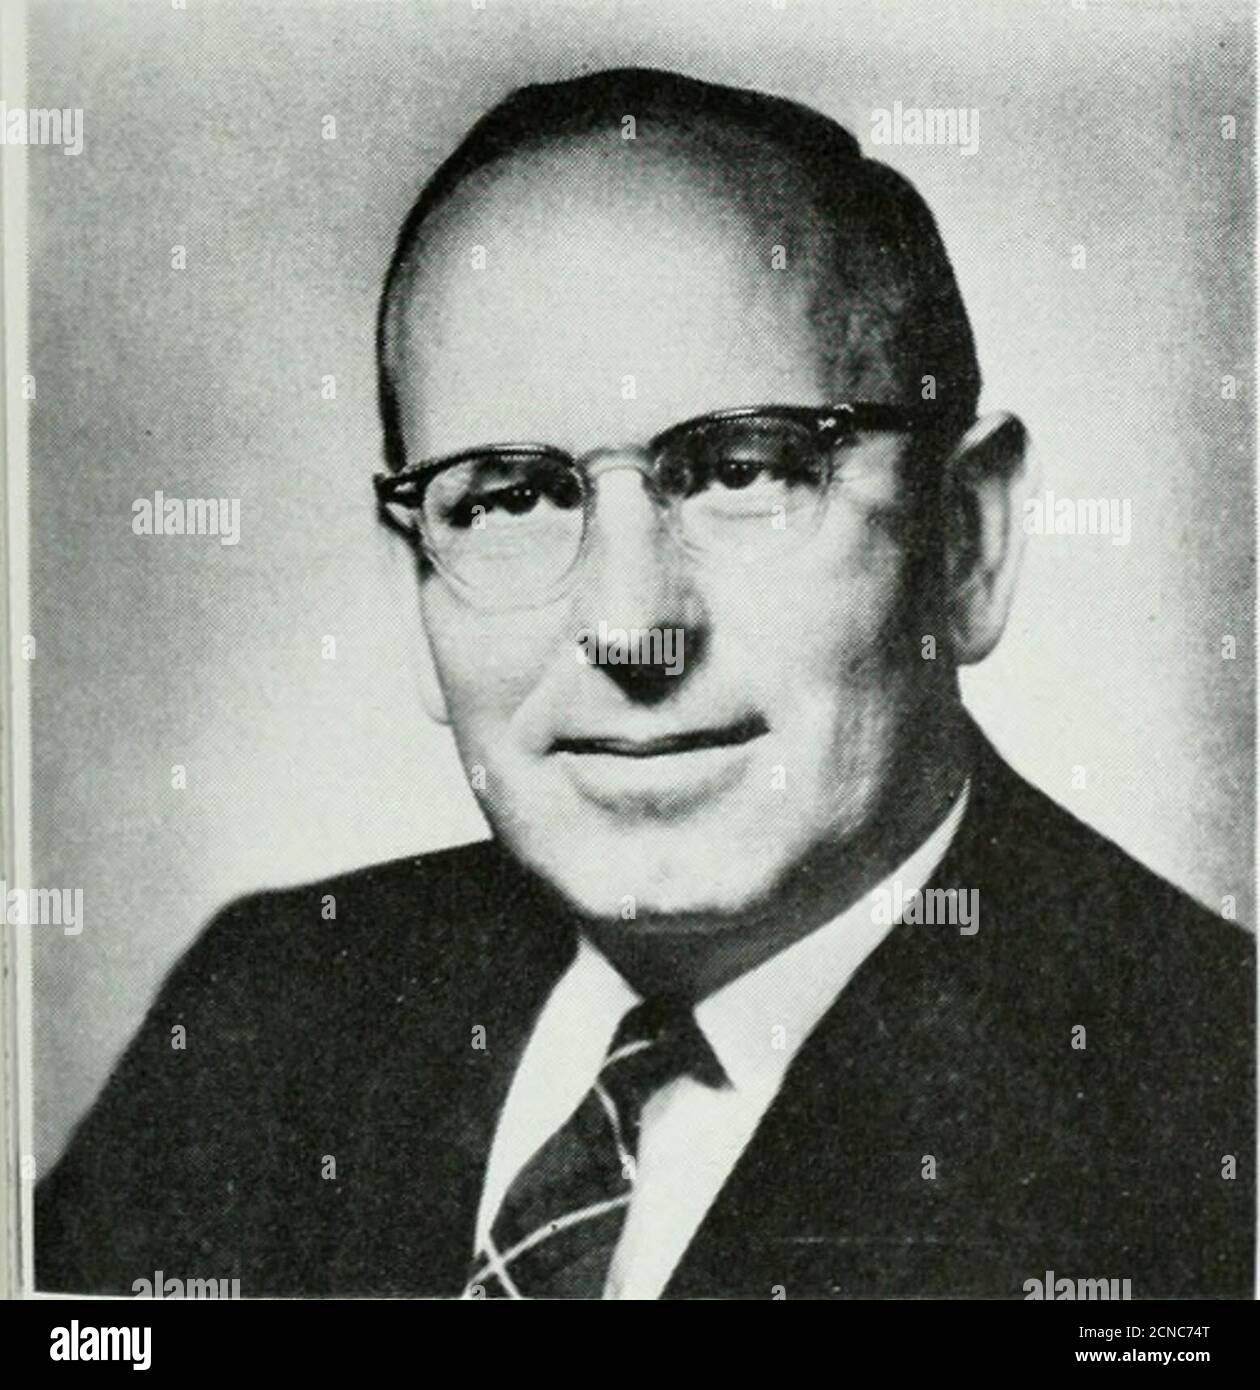 . Bell telephone magazine . ing. He also has served as consultant tothe Defense Department, first as a mem-ber of the Radar Panel of the Research and Development Board and then as amember of the Technical Advisory Panelon Electronics. In March, 1961 PresidentKennedy appointed him to head ProjectBeacon, a task force to study safe andefficient use of air space. He is currentlychairman of the Technical Advisory Boardto the Federal Aviation Agency. ■ Robert B. Kings article, ScientificSampling on page 16, discusses therecent surge of interest in the use ofsampling procedures in Bell System oper-at Stock Photo